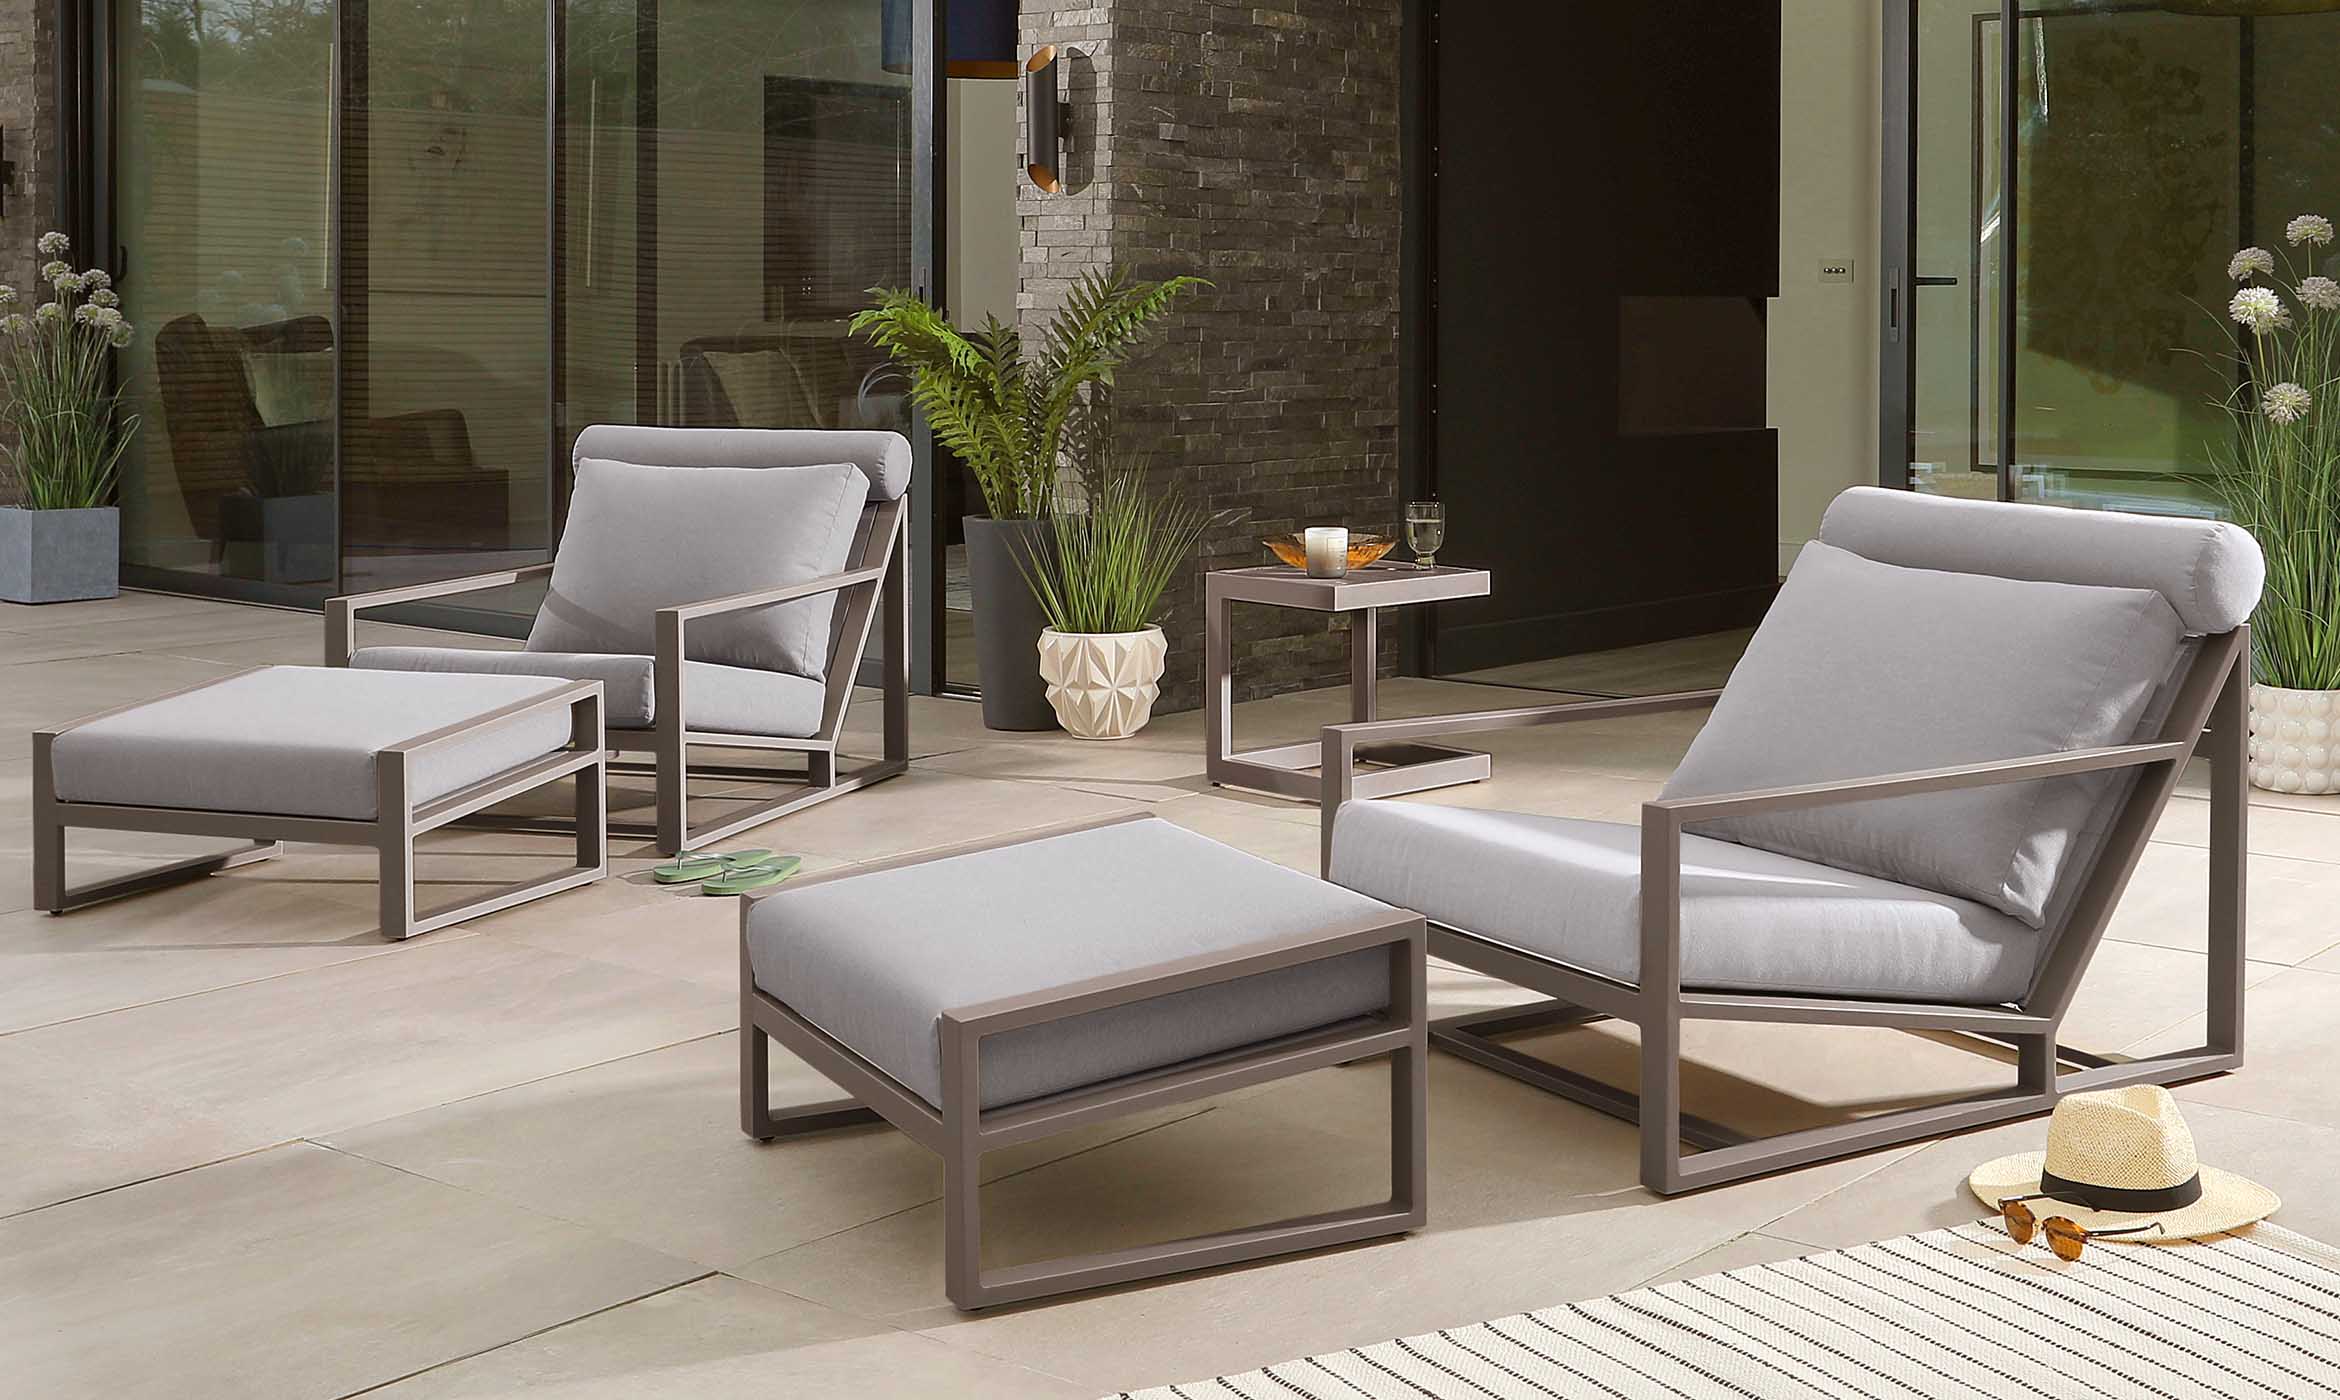 The Danetti Guide To Buying Outdoor Furniture